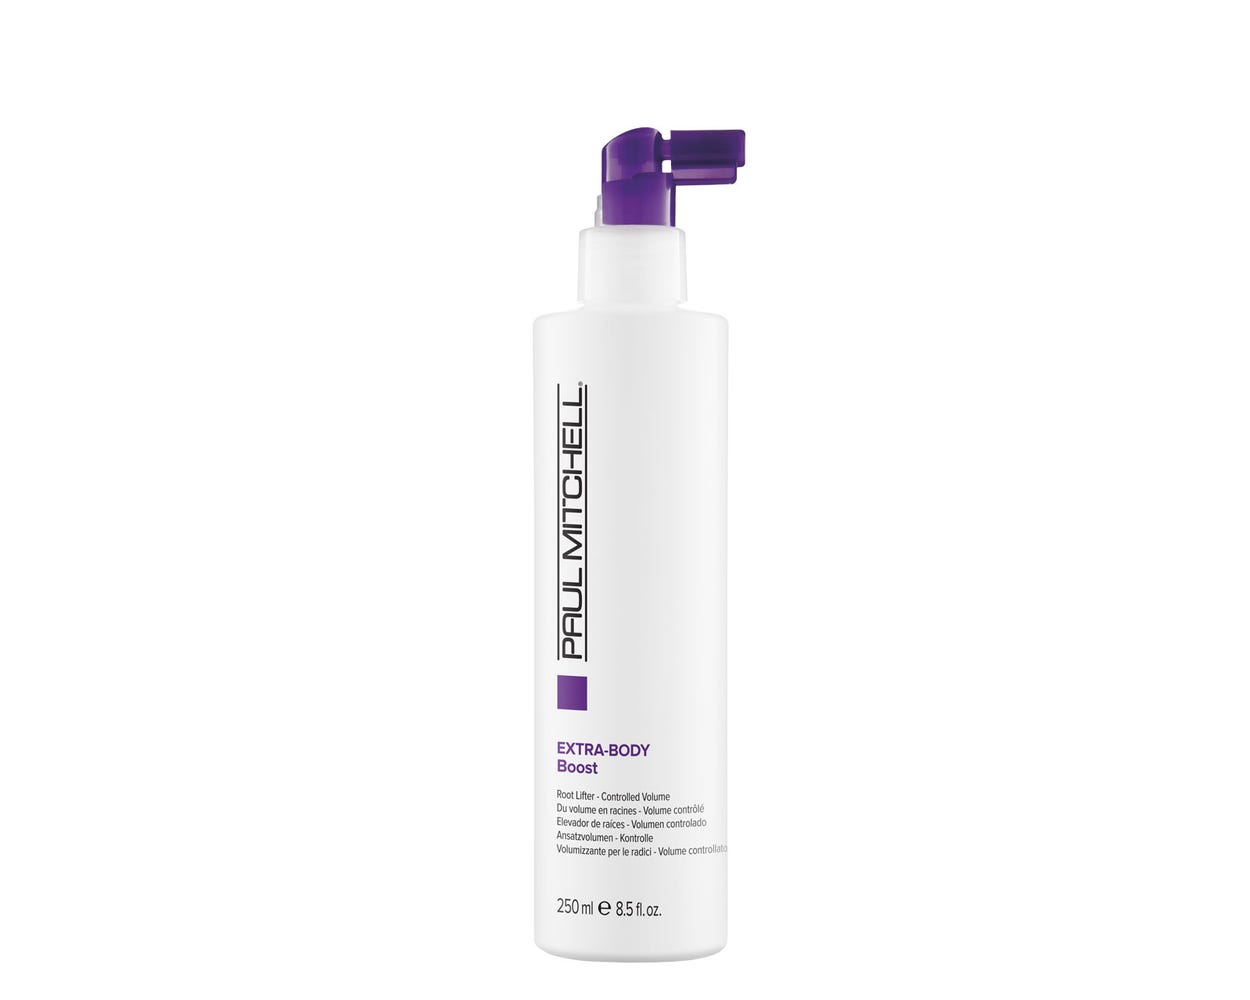 Paul Mitchell Extra-Body Boost Volumizing Spray, Lifts + Volumizes, For Fine Hair 8.5 Fl Oz (Pack of 1)